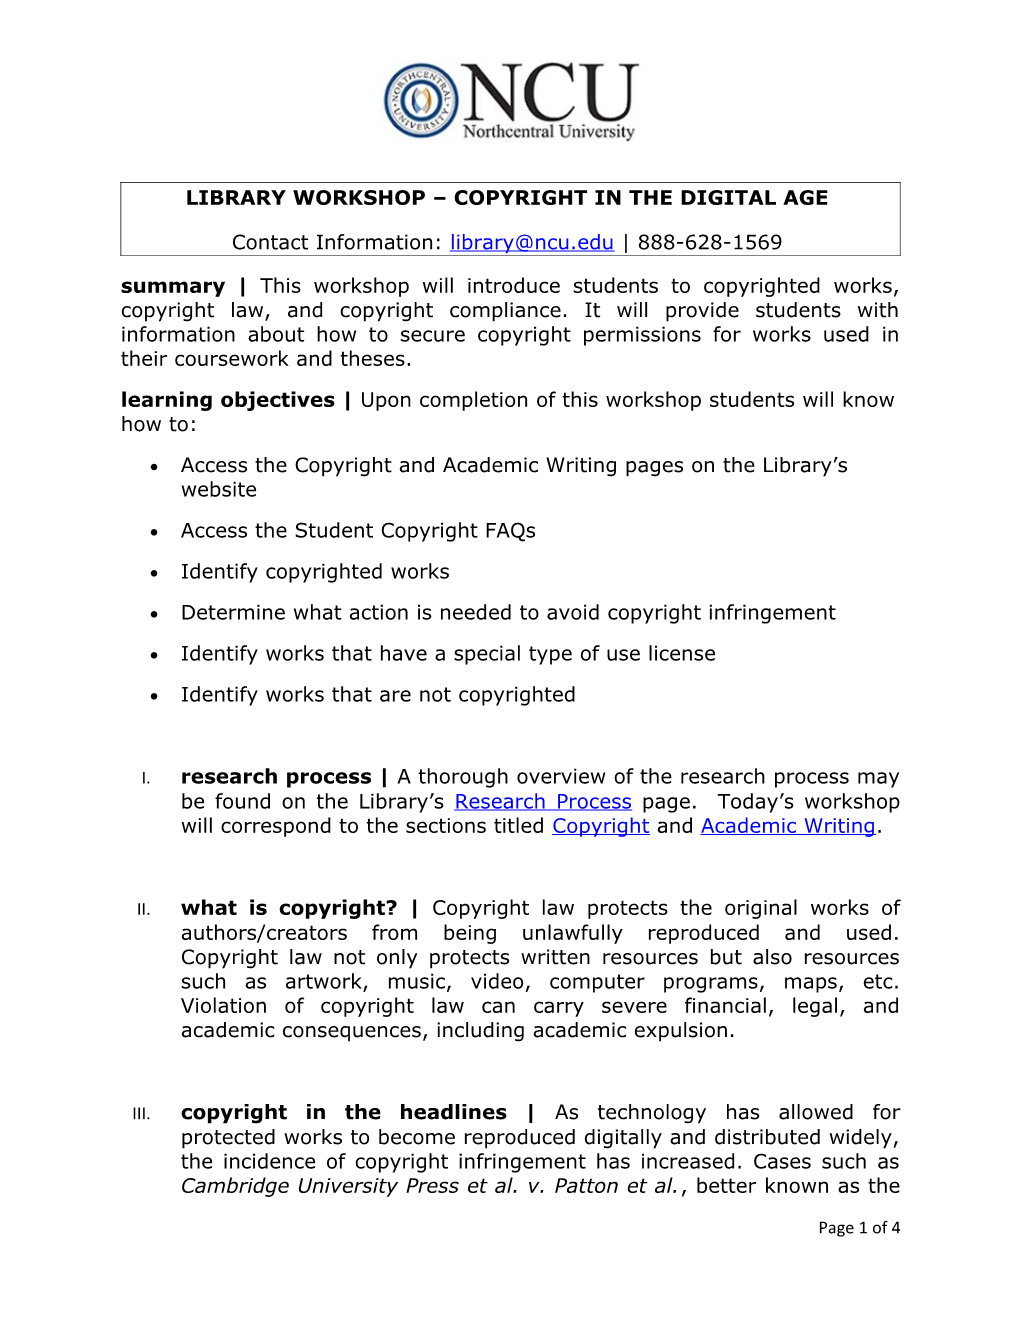 Library Workshop Copyright in the Digital Age